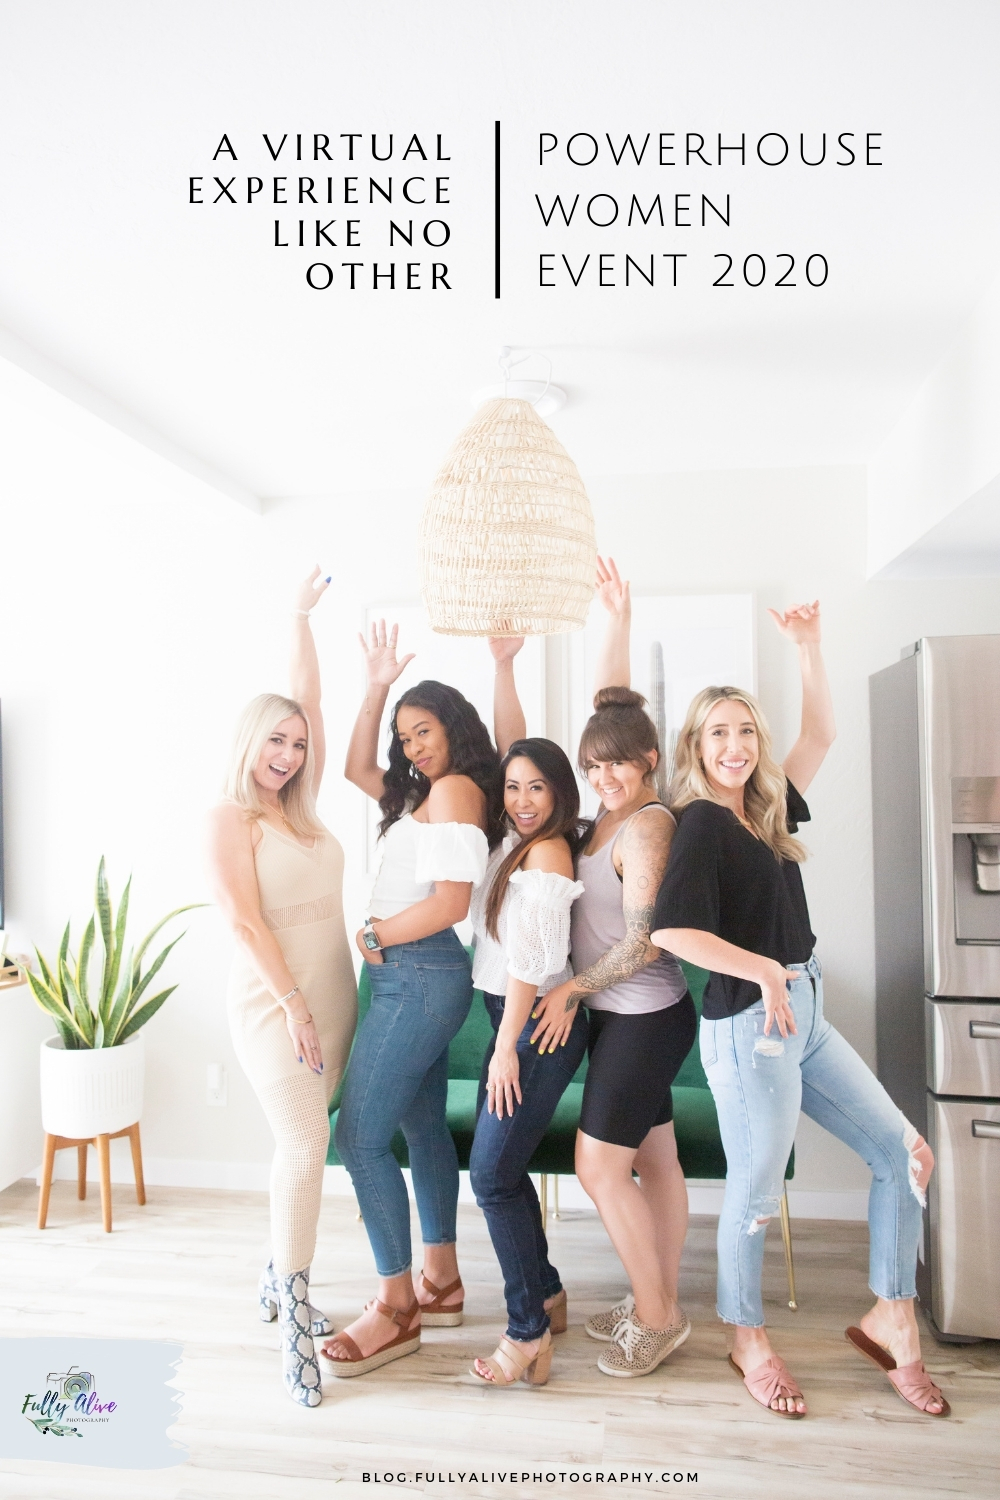 A Virtual Experience Like No Other Powerhouse Women Event 2020 by Fully Alive Photography